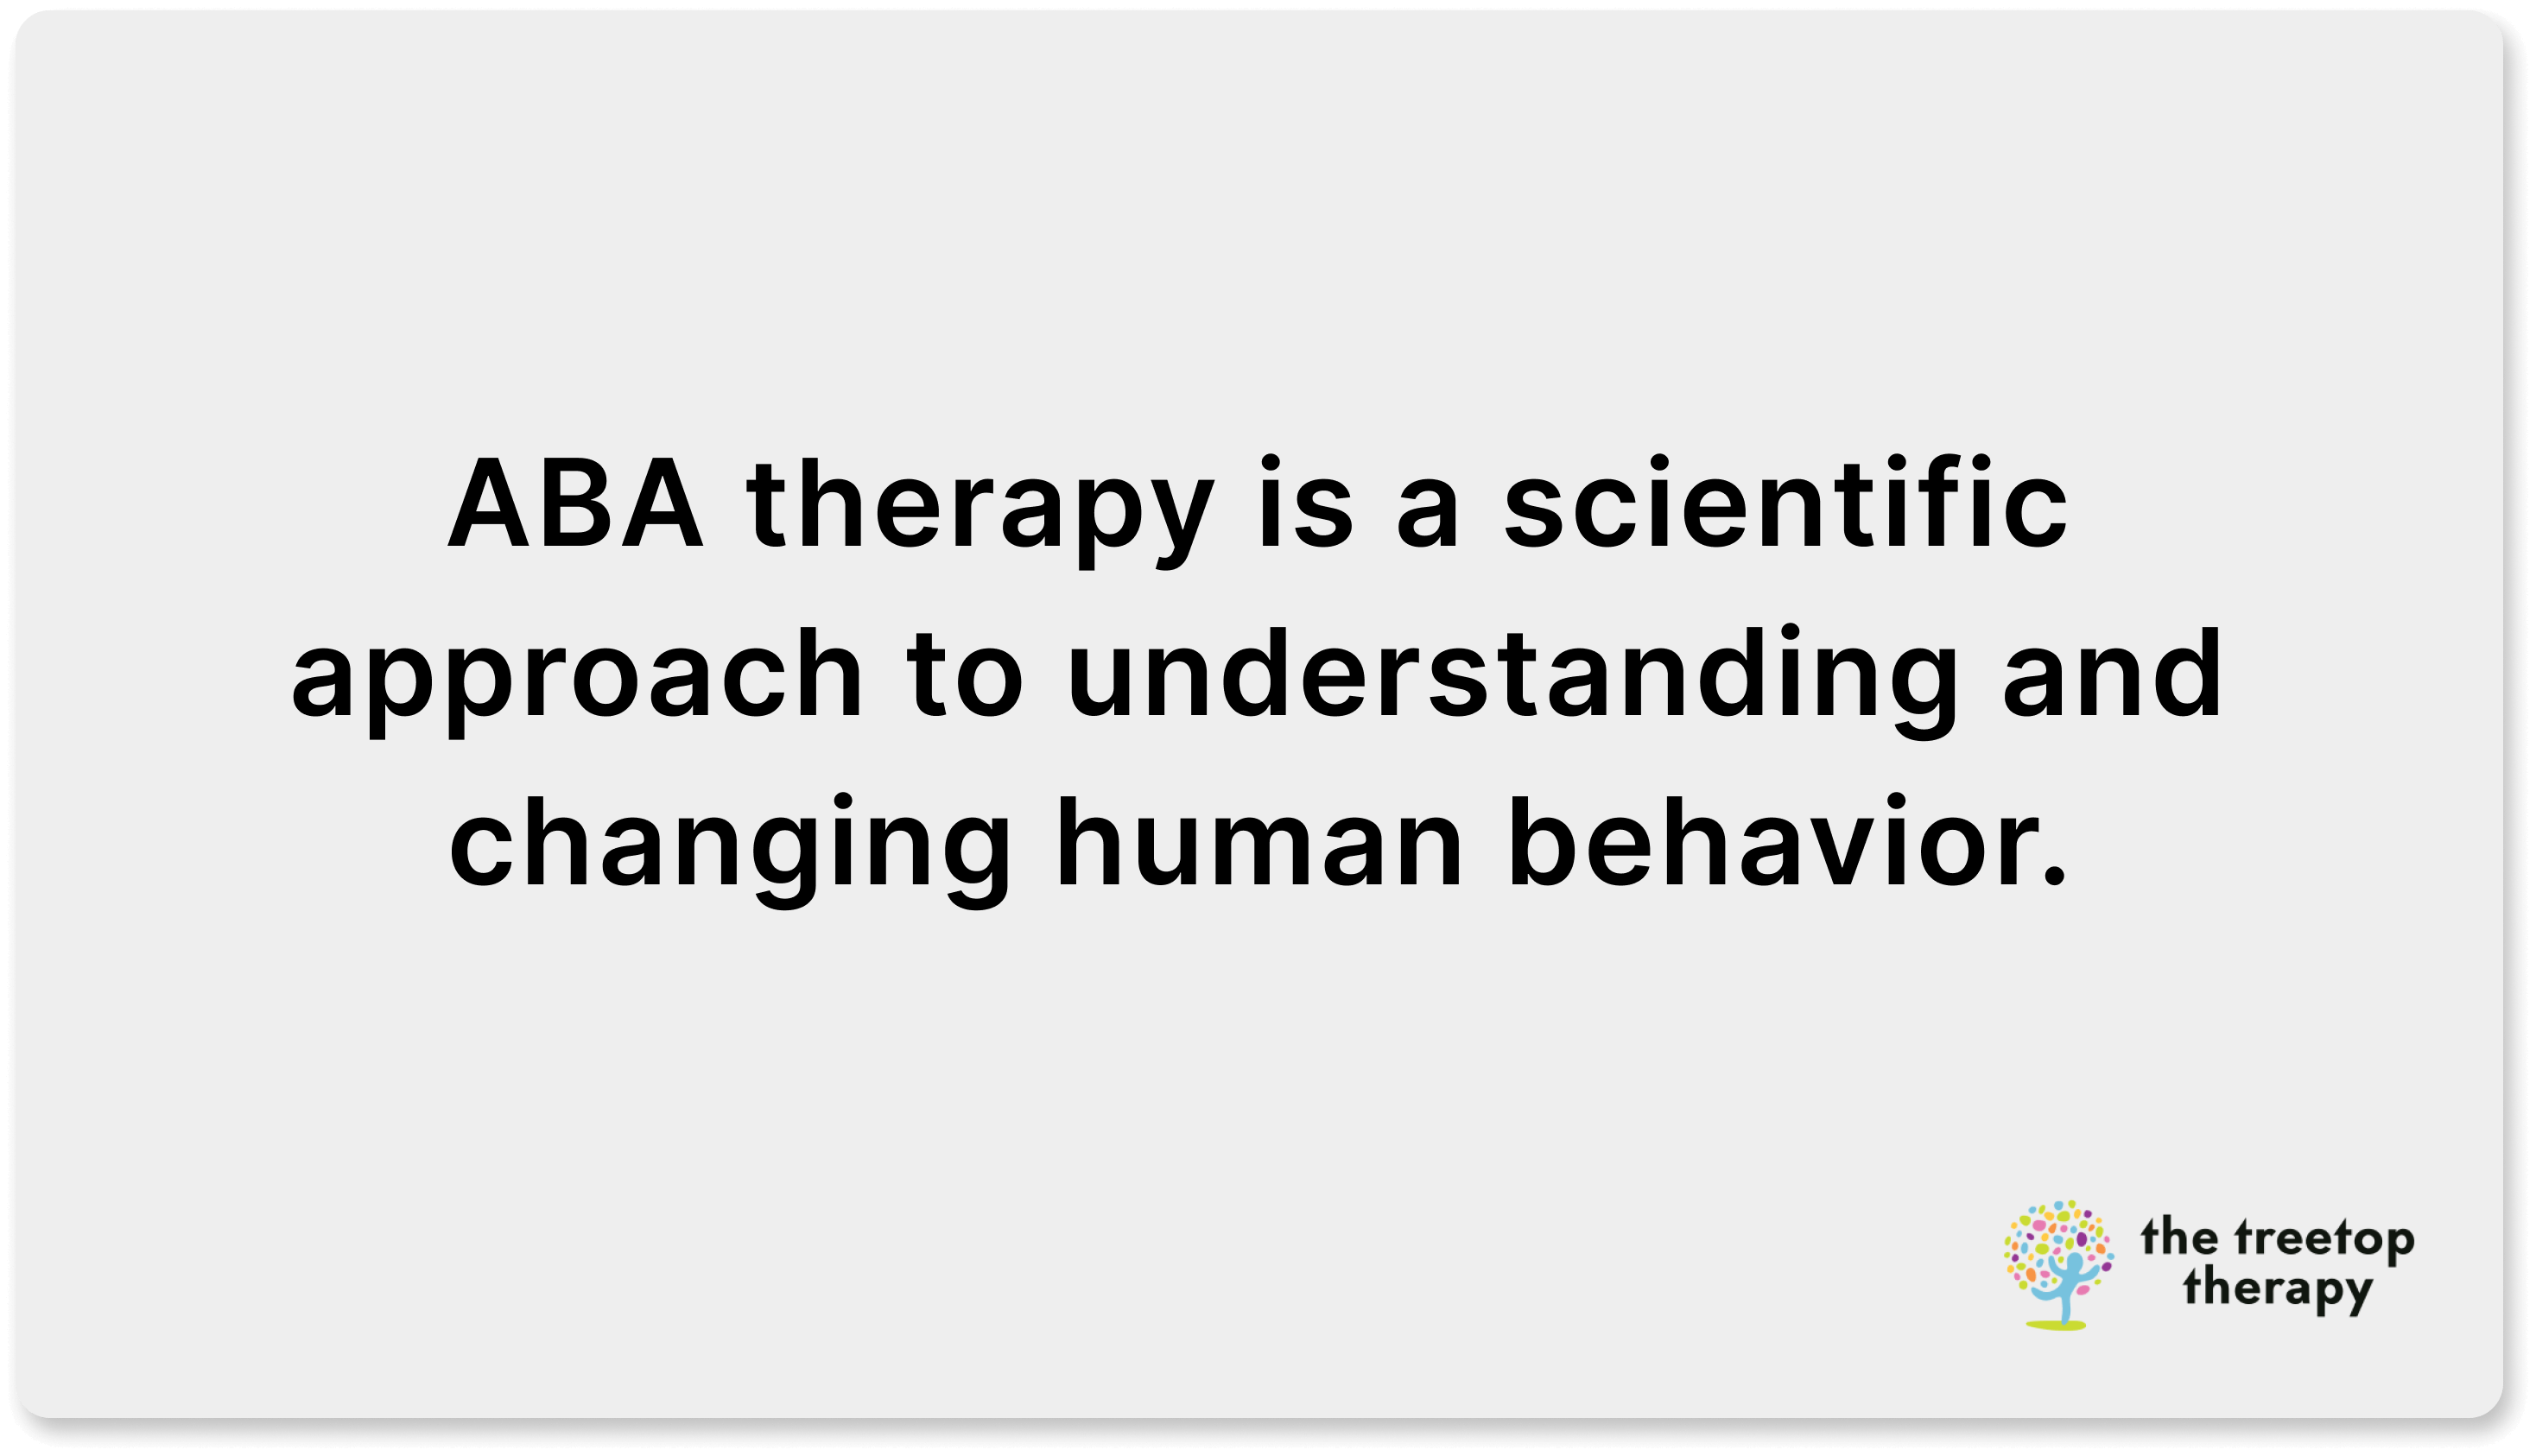 what is aba therapy?